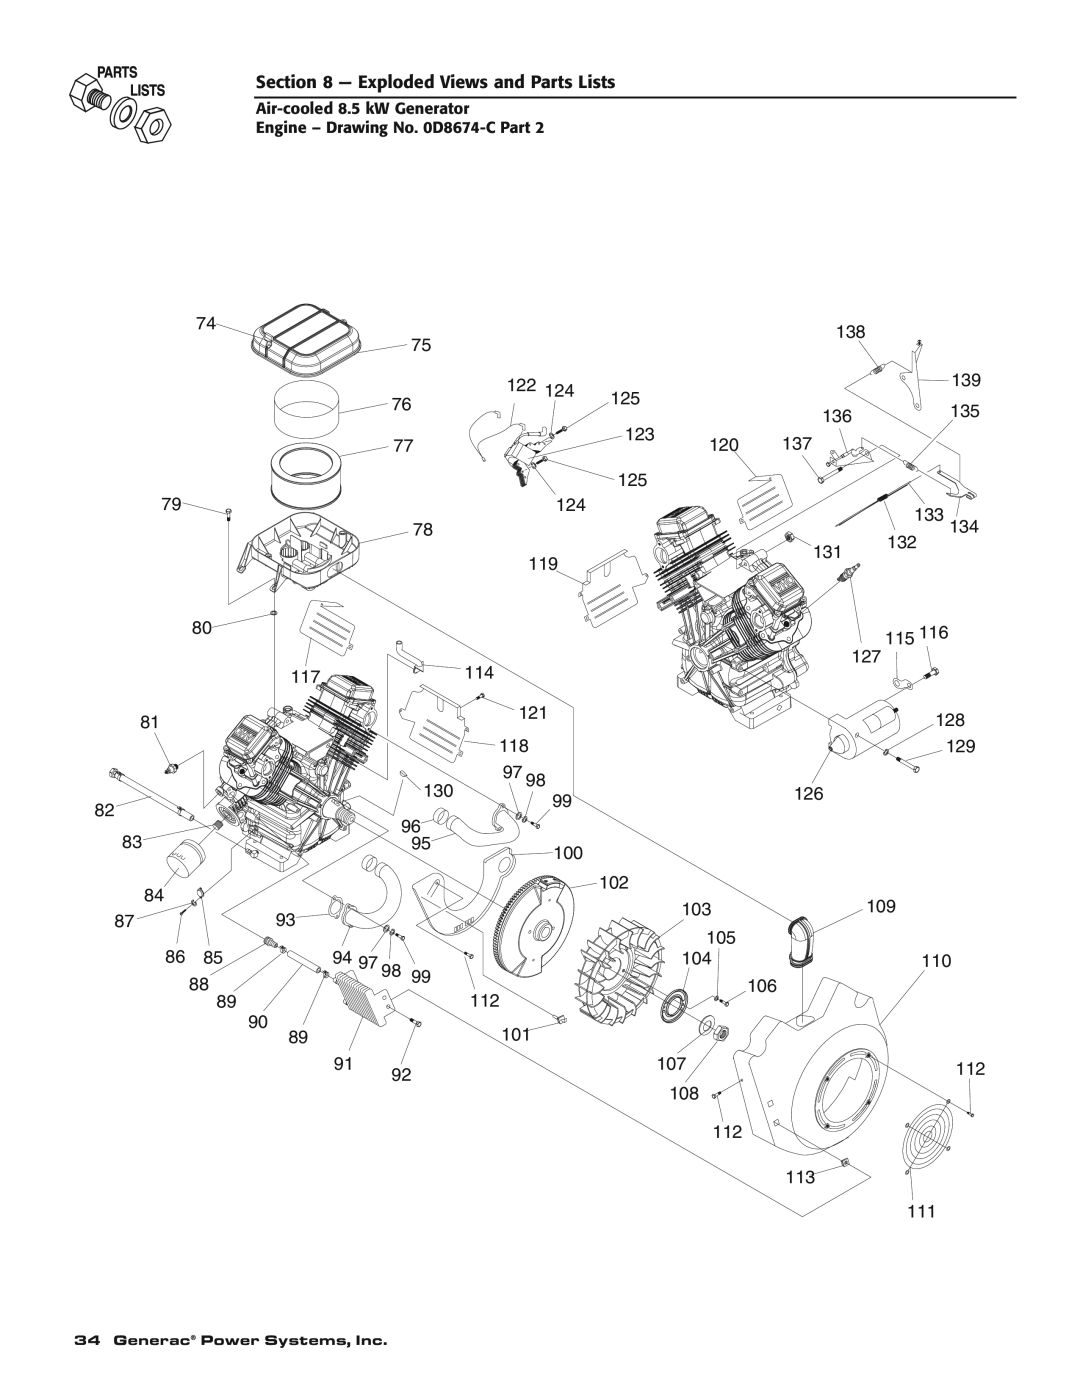 Generac 004692-0 owner manual Exploded Views and Parts Lists, Generac Power Systems, Inc 